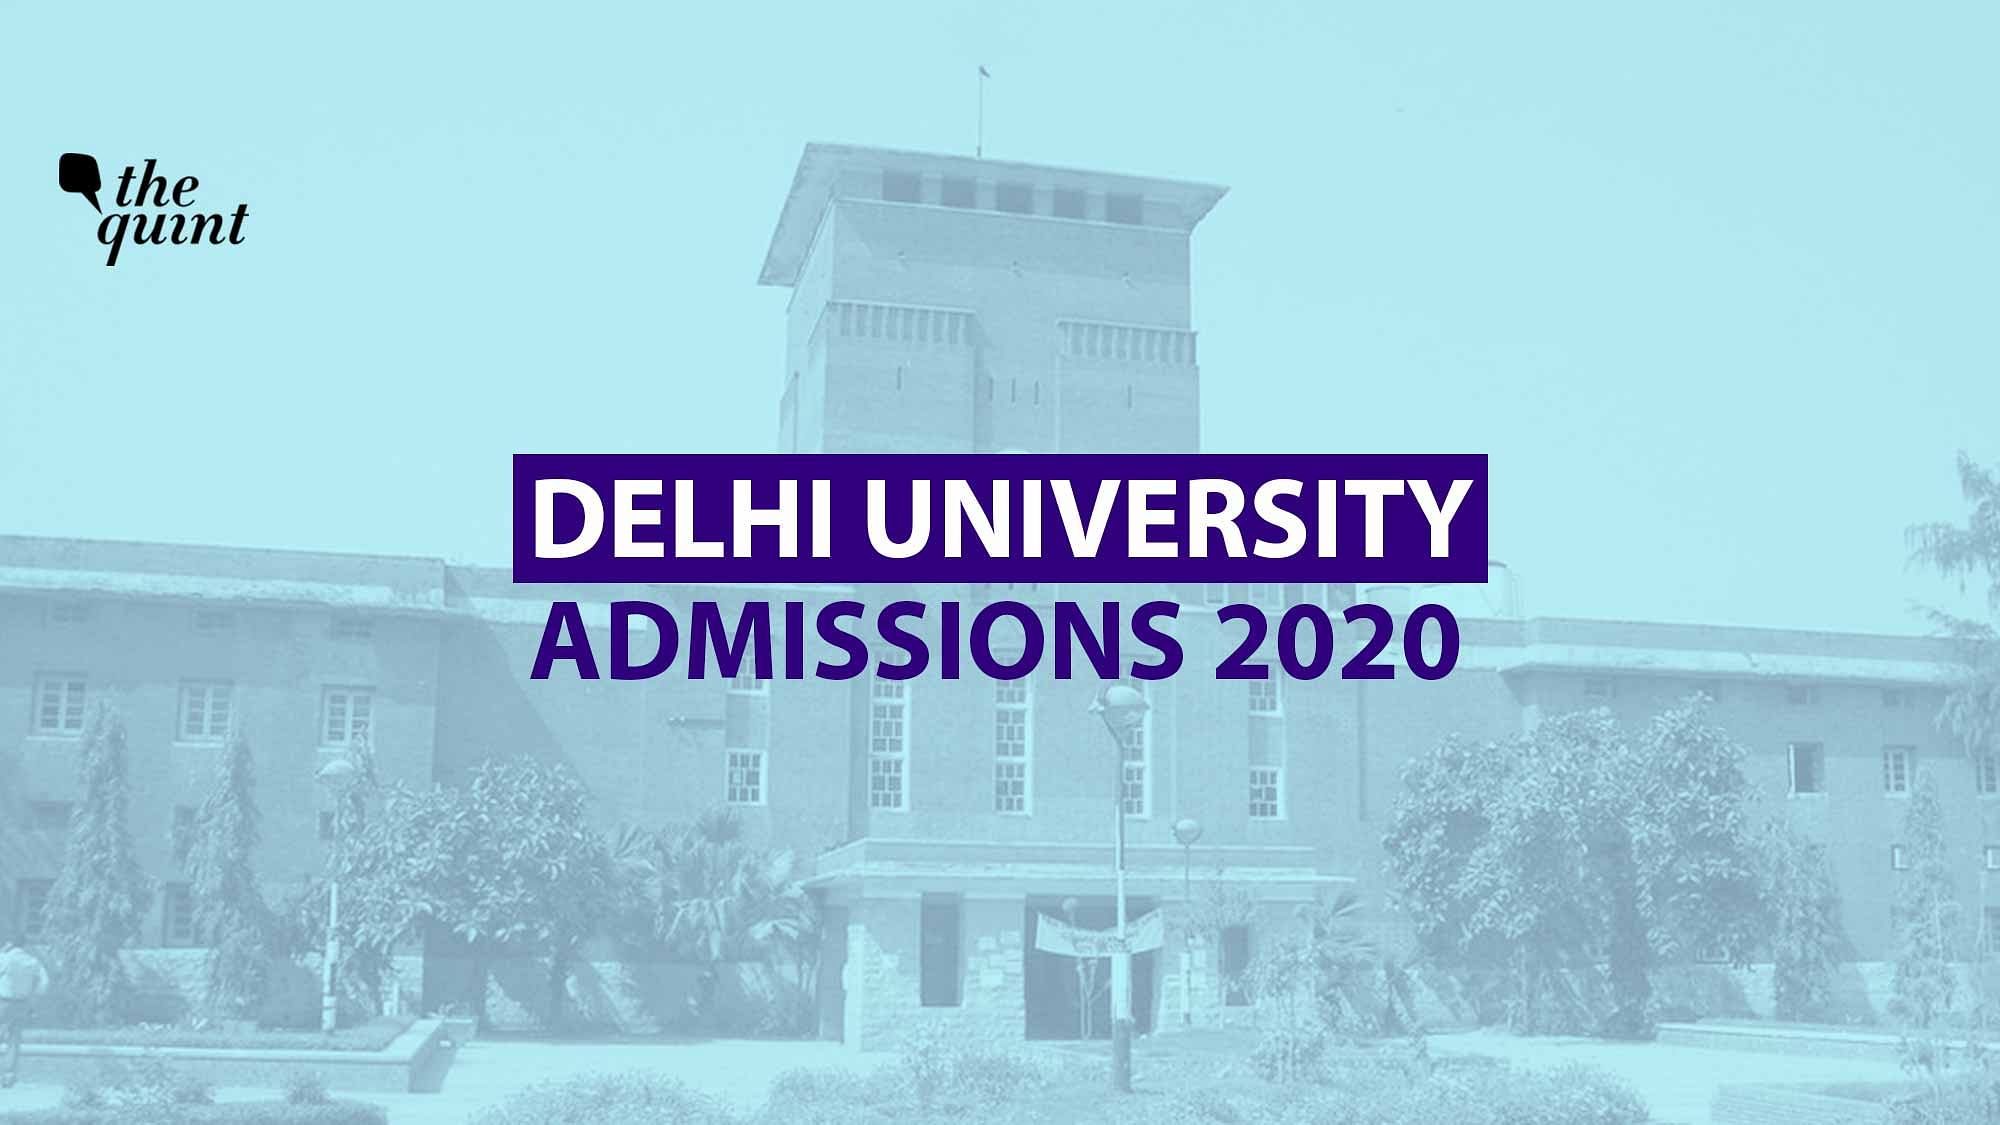 Delhi University Entrance Exam 2020: The National Testing Agency will be conducting the DUET 2020 entrance exam from 6-11 September. (Image used for representation only)